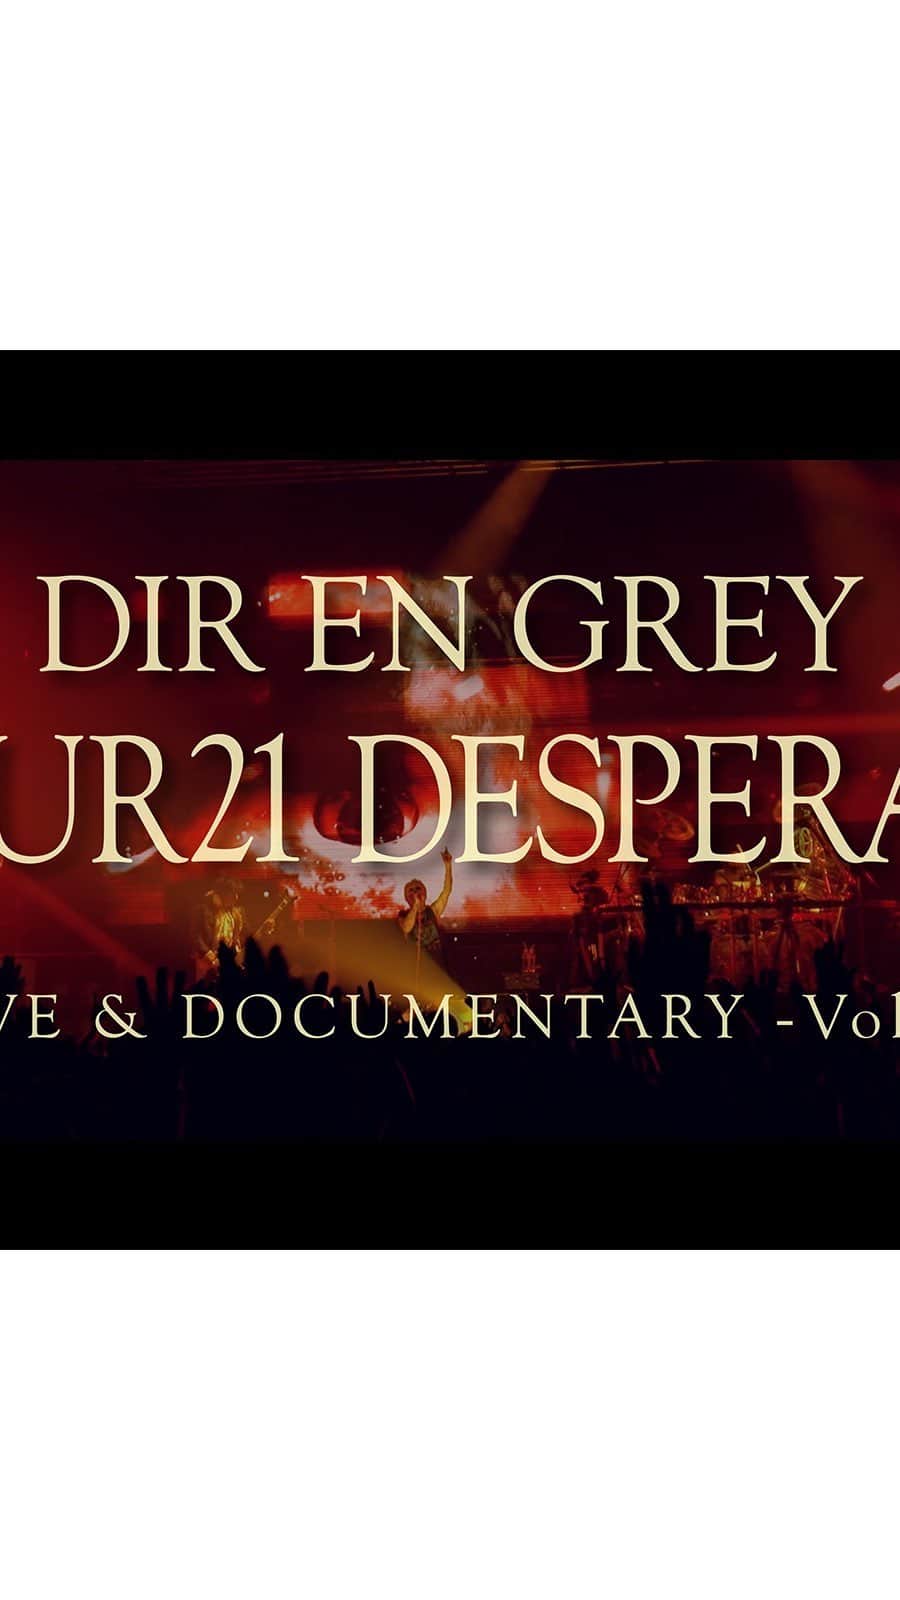 DIR EN GREYのインスタグラム：「. ［🇯🇵 JP 🇯🇵］［🇬🇧 EN 🇺🇸］ 動画配信サービス「GALACAA」のメンバーシップ（サブスクリプションサービス／月額980円）内限定の新コンテンツ【DIR EN GREY TOUR21 DESPERATE LIVE & DOCUMENTARY】の第三弾となる動画が配信開始となりました。 ⁡ 2021年9月から11月にかけて行われた2年ぶりの全国ツアー“TOUR21 DESPERATE”。同ツアーの2021年10月27日(水) Zepp Haneda公演より選りすぐりのLIVE映像と、ツアー全公演のバックステージ密着で収められた貴重なドキュメンタリー映像を特別編集した動画コンテンツをGALACAA独占で公開しております。 ⁡ 本コンテンツは全5回で構成されており、3回目の今回は「「欲巣にDREAMBOX」あるいは成熟の理念と冷たい雨」「赫」「朧」「HYDRA -666-」のLIVE映像、そして10月1日(金) ホクト文化ホール公演・10月10日(日) 倉敷市芸文館公演でのドキュメンタリー映像を公開。第1回から第5回まで、各回約30分に渡るGALACAA独占映像を毎月20日・5ヶ月連続にて公開していきます。 ⁡ ■「DIR EN GREY TOUR21 DESPERATE LIVE & DOCUMENTARY -Vol.1-」 配信期間：2023年1月20日(金)～2023年3月19日(日) ⁡ ■「DIR EN GREY TOUR21 DESPERATE LIVE & DOCUMENTARY -Vol.2-」 配信期間：2023年2月20日(月)～2023年4月19日(水) ⁡ ■「DIR EN GREY TOUR21 DESPERATE LIVE & DOCUMENTARY -Vol.3-」 配信期間：2023年3月20日(月)～2023年5月19日(金) ⁡ ■「DIR EN GREY TOUR21 DESPERATE LIVE & DOCUMENTARY -Vol.4-」 配信期間：2023年4月20日(木)～2023年6月19日(月) ⁡ ■「DIR EN GREY TOUR21 DESPERATE LIVE & DOCUMENTARY -Vol.5-」 配信期間：2023年5月20日(土)～2023年7月19日(水) ⁡ ※更新日は前後する場合がございます。予めご了承ください。 ⁡ ⁡ その他、「GALACAA」のメンバーシップではマネージャー藤枝が各現場での様子を突撃撮影しアップしていく【マネージャー藤枝の突撃レポート・ザ・ムービー！】も月2回限定公開中。 この機会に、是非ご利用ください！  ◤◢◤◢◤◢ ↓ 🇬🇧 EN 🇺🇸 ↓ ◤◢◤◢◤◢ ⁡ The third part of【DIR EN GREY TOUR21 DESPERATE LIVE & DOCUMENTARY】 is now available in the membership corner of the video streaming platform 「GALACAA」 (monthly subscription fee: ￥980/month).  ”TOUR21 DESPERATE”, held from September to November 2021 after 2 years since the previous domestic tour. An exclusive video content featuring live clips from this tour’s show held at Zepp Haneda on Oct. 27th (Wed.), 2021 and a special documentary made of scenes from the backstages from the whole tour.  This content will be streamed in 5 parts and the 3rd one of them is out today, featuring live clips of 「欲巣にDREAMBOX」あるいは成熟の理念と冷たい雨 (“Yokusou Ni DREAMBOX” Aruiwa Seijuku No Rinen To Tsumetai Ame)」, 「赫 (Aka)」, 「朧 (Oboro)」 and 「HYDRA -666-」, as well as the documentary from the Hokuto Cultural Hall Medium Hall (Oct. 1st, 2021) and Kurashiki Geibunkan (Oct. 10th, 2021). Each part of this content is about 30 minutes long, and will be released once per month, on the 20th, for 5 months in a row.⁡ ⁡ ⁡#DIRENGREY #GALACAA」